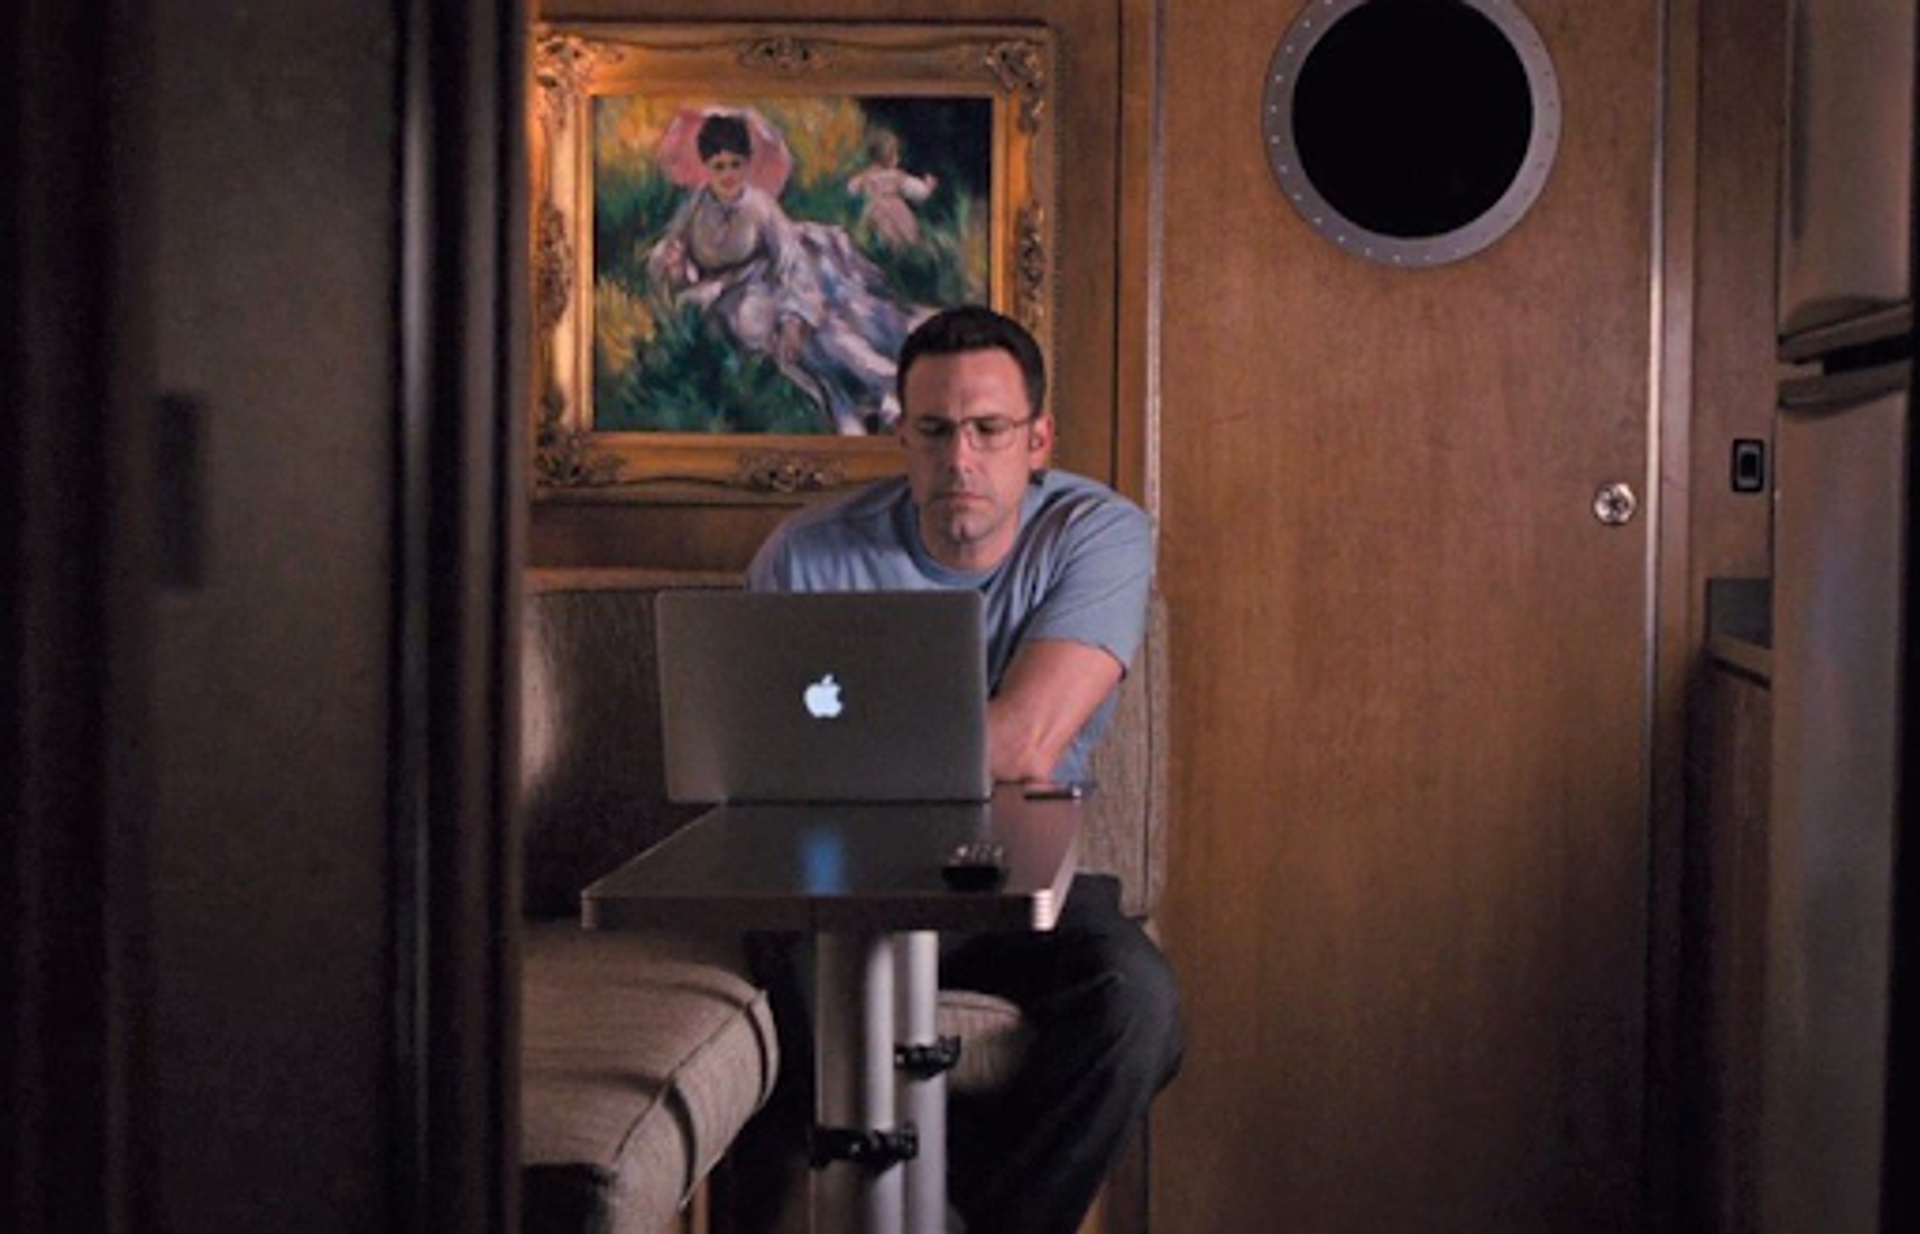 Photograph from the film The Accountant. Man sits at a table with his laptop open. There is a fine art painting behind him. 